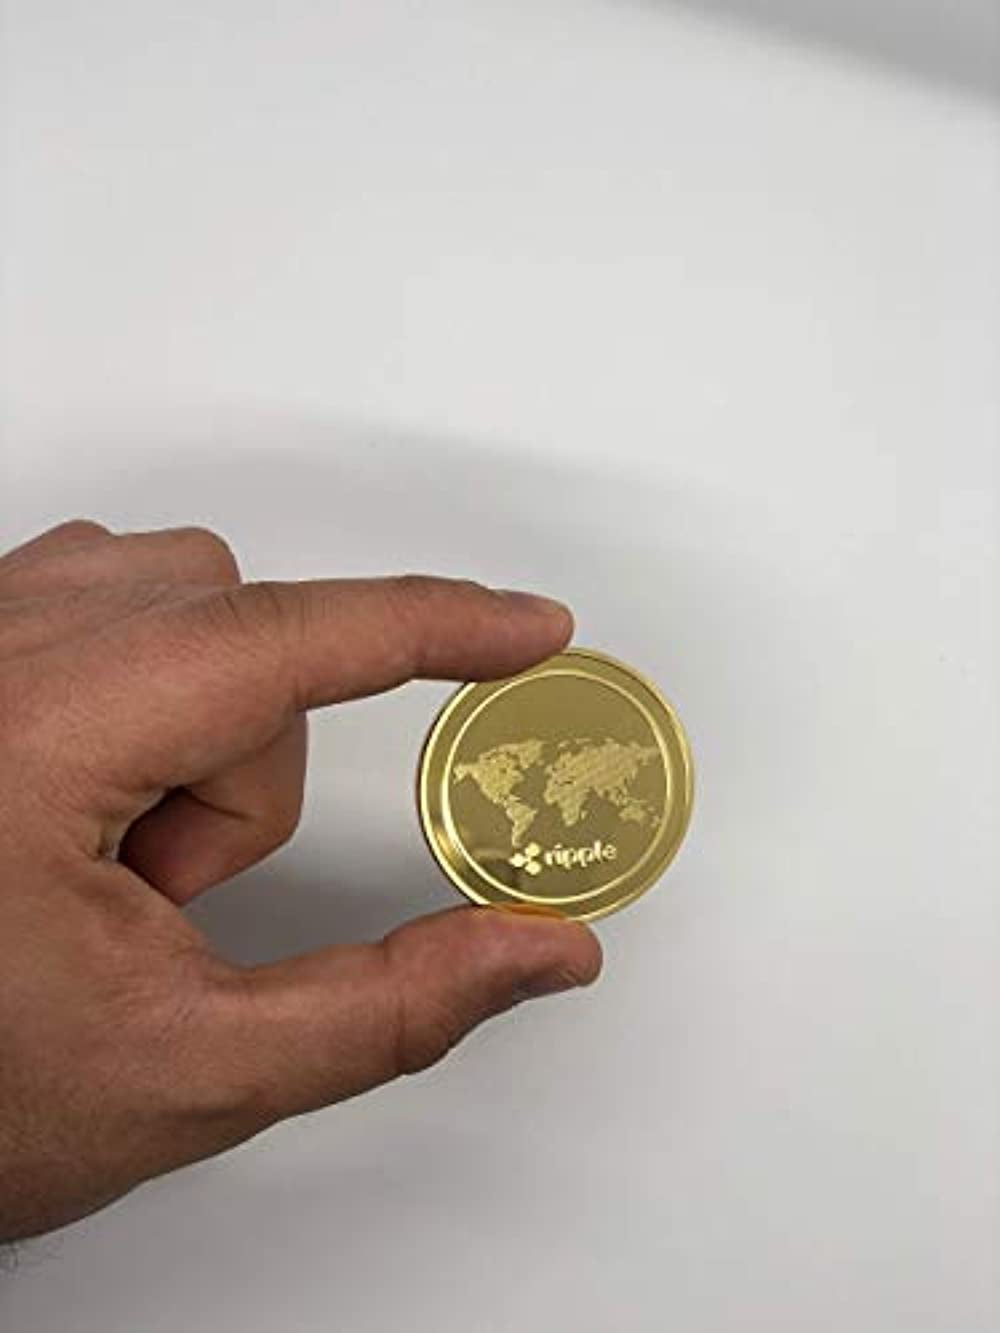 crypto coin with limited supply